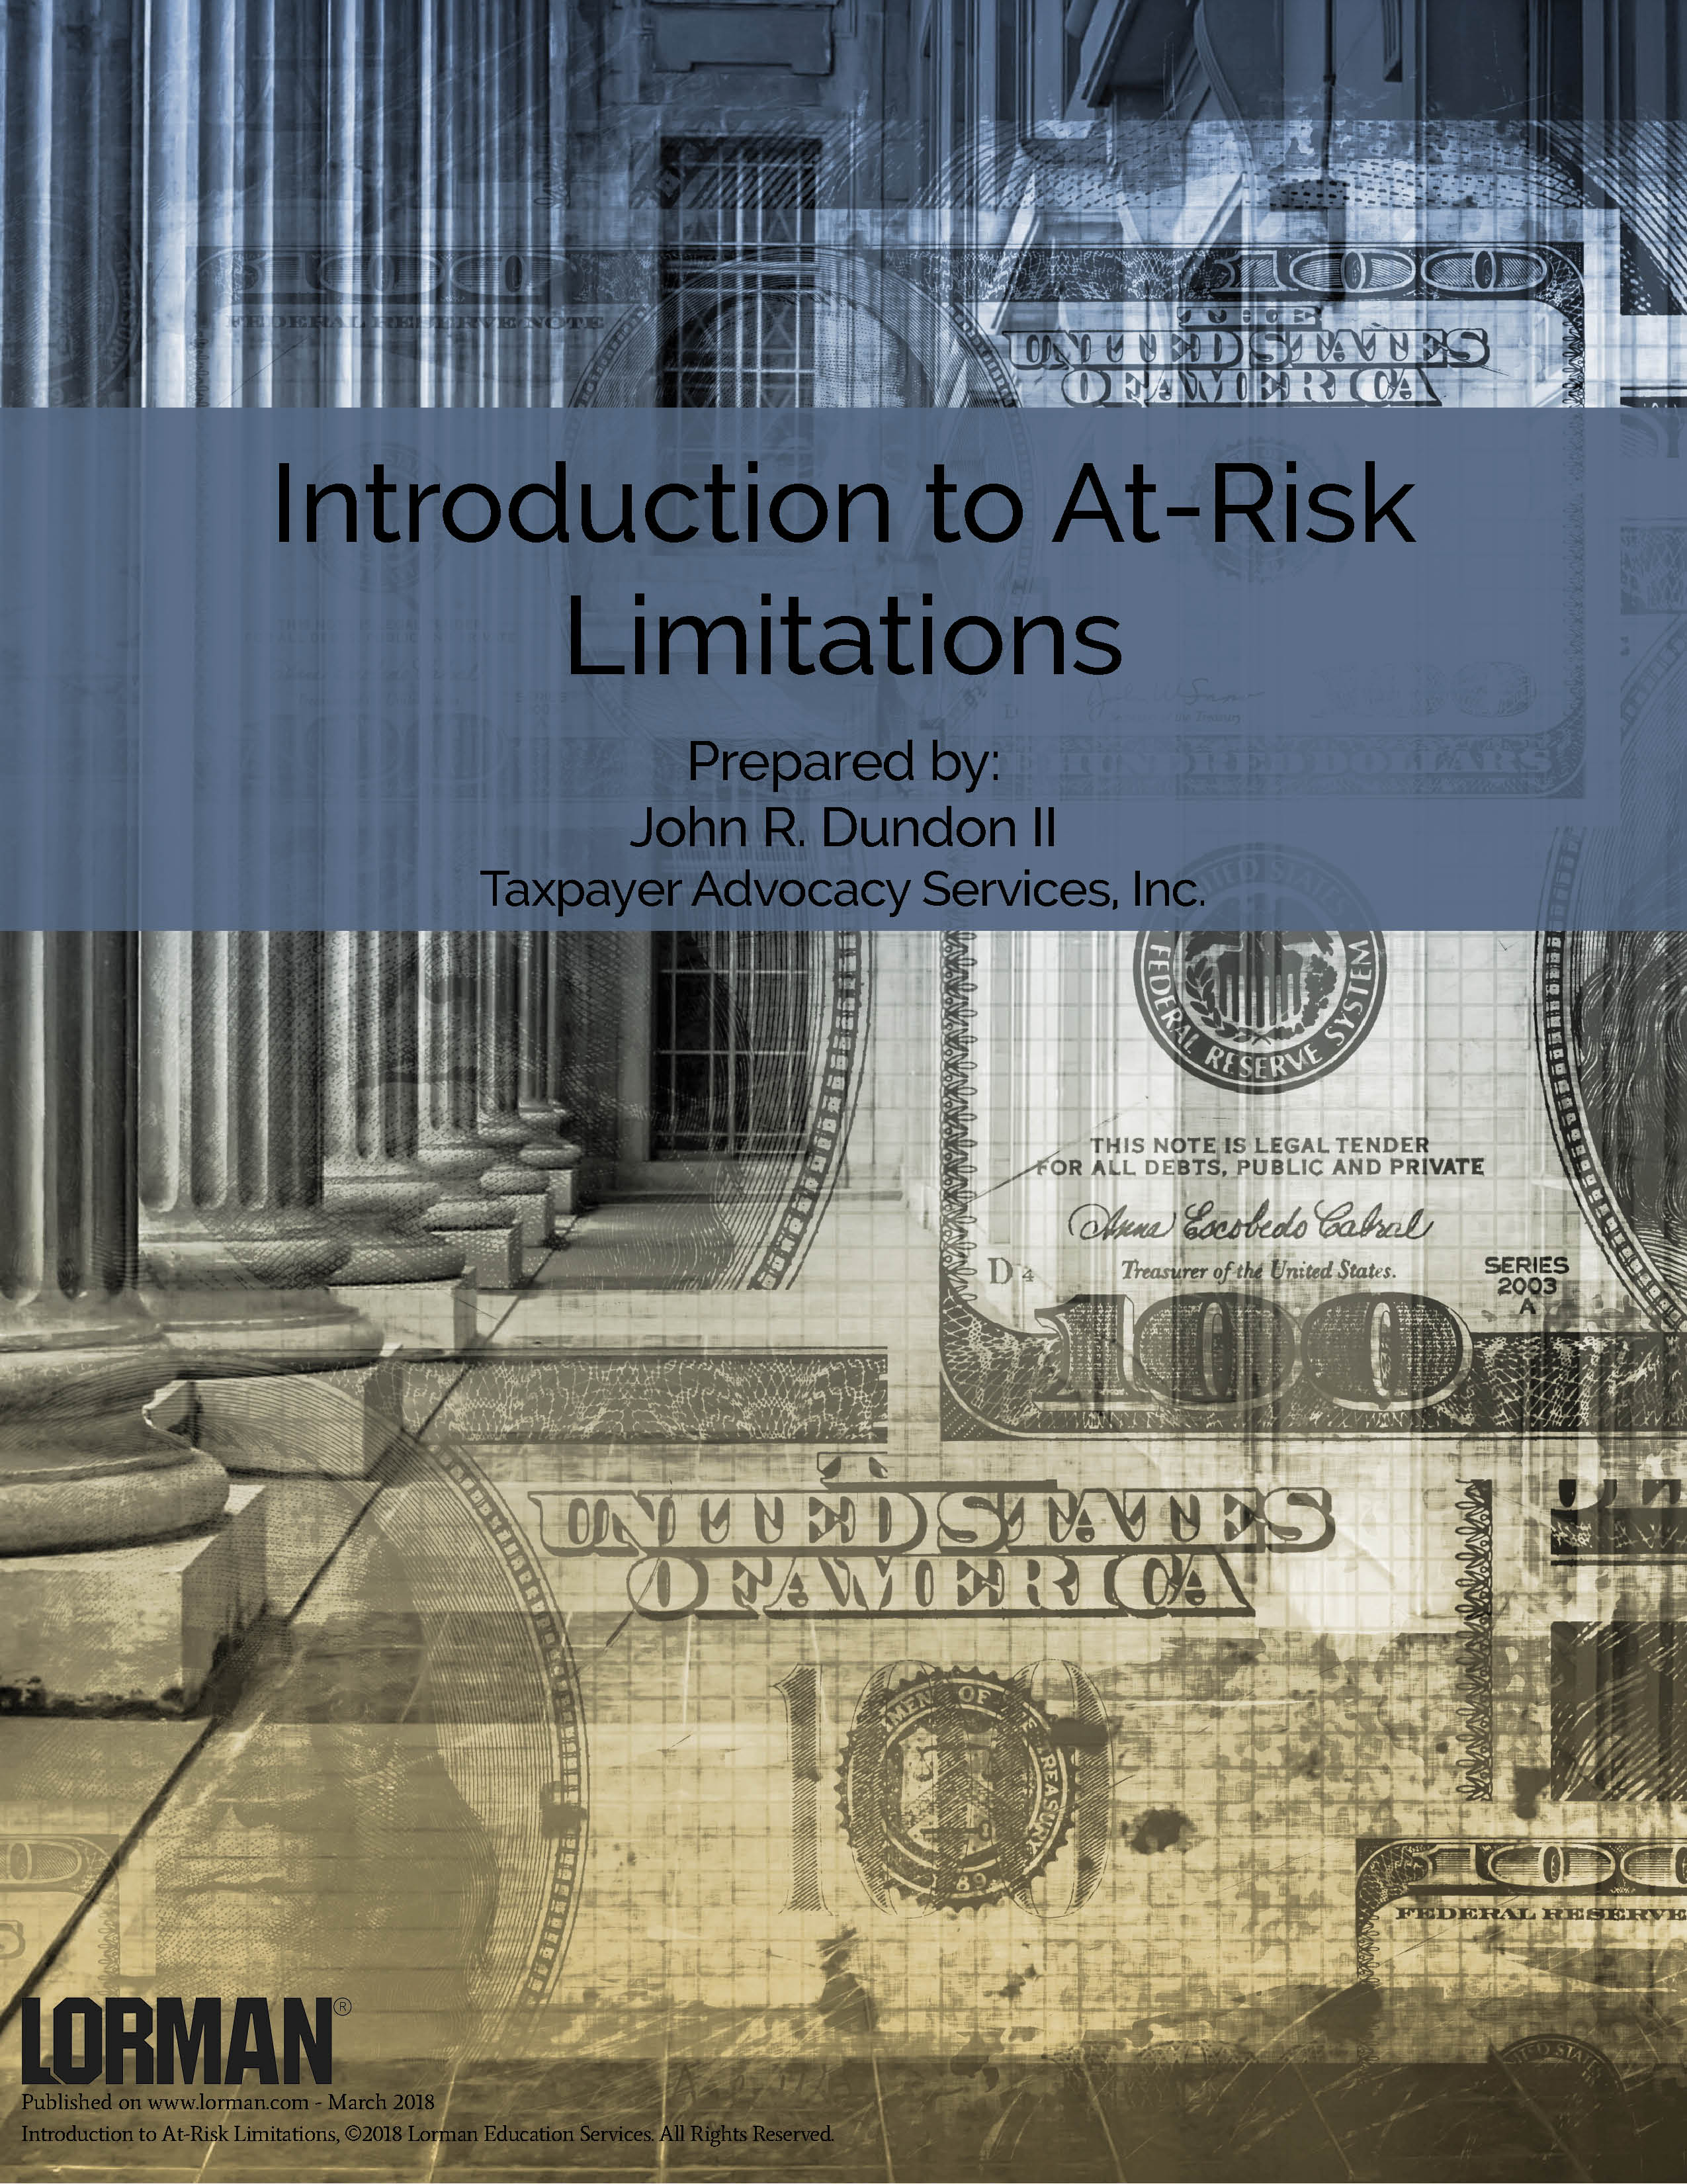 Introduction to At-Risk Limitations